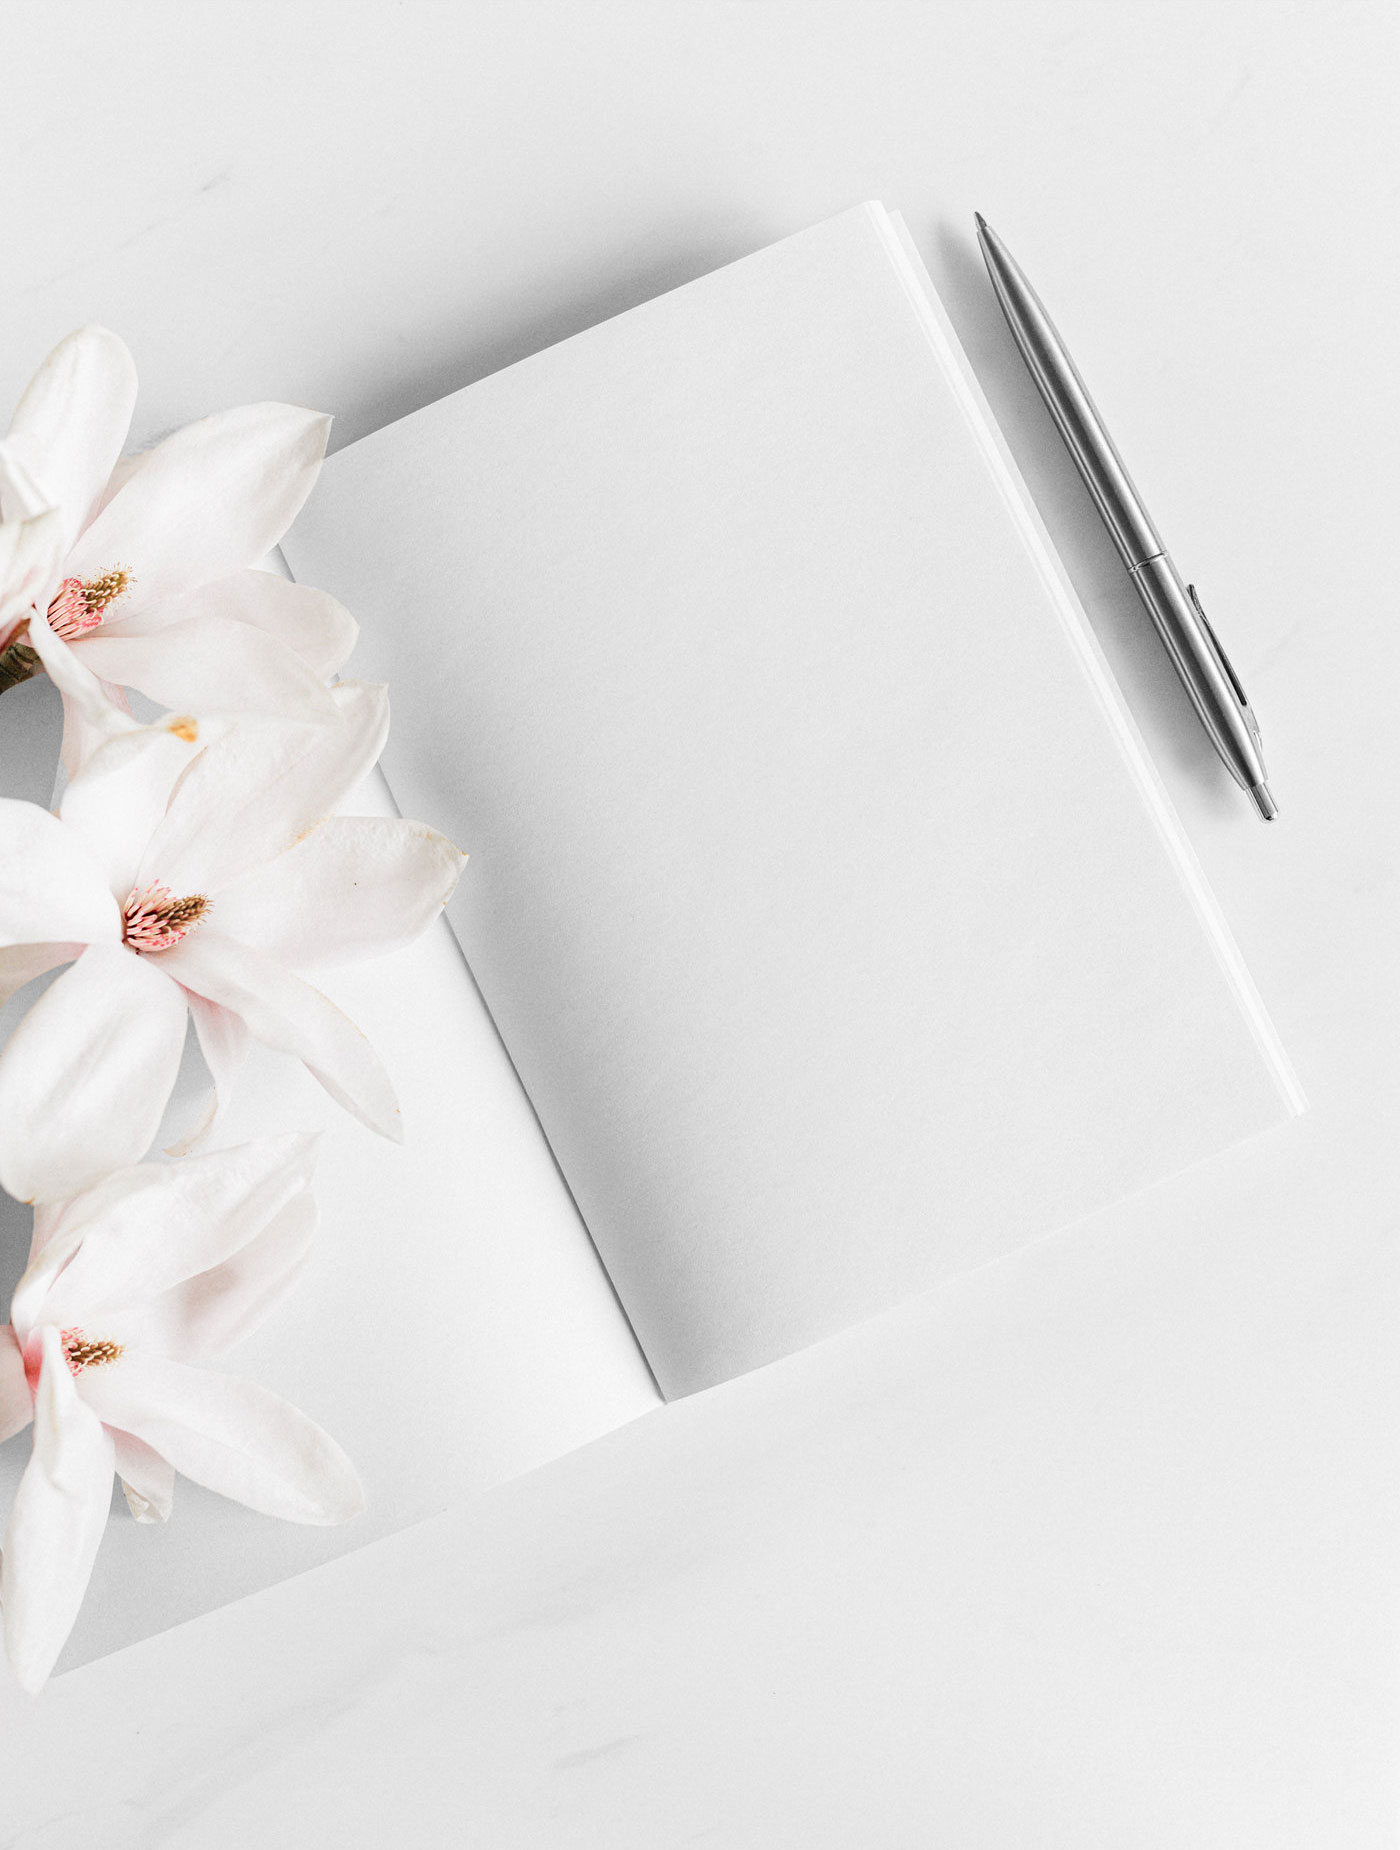 Top View of Artistic Notebook Mockup with Flowers FREE PSD